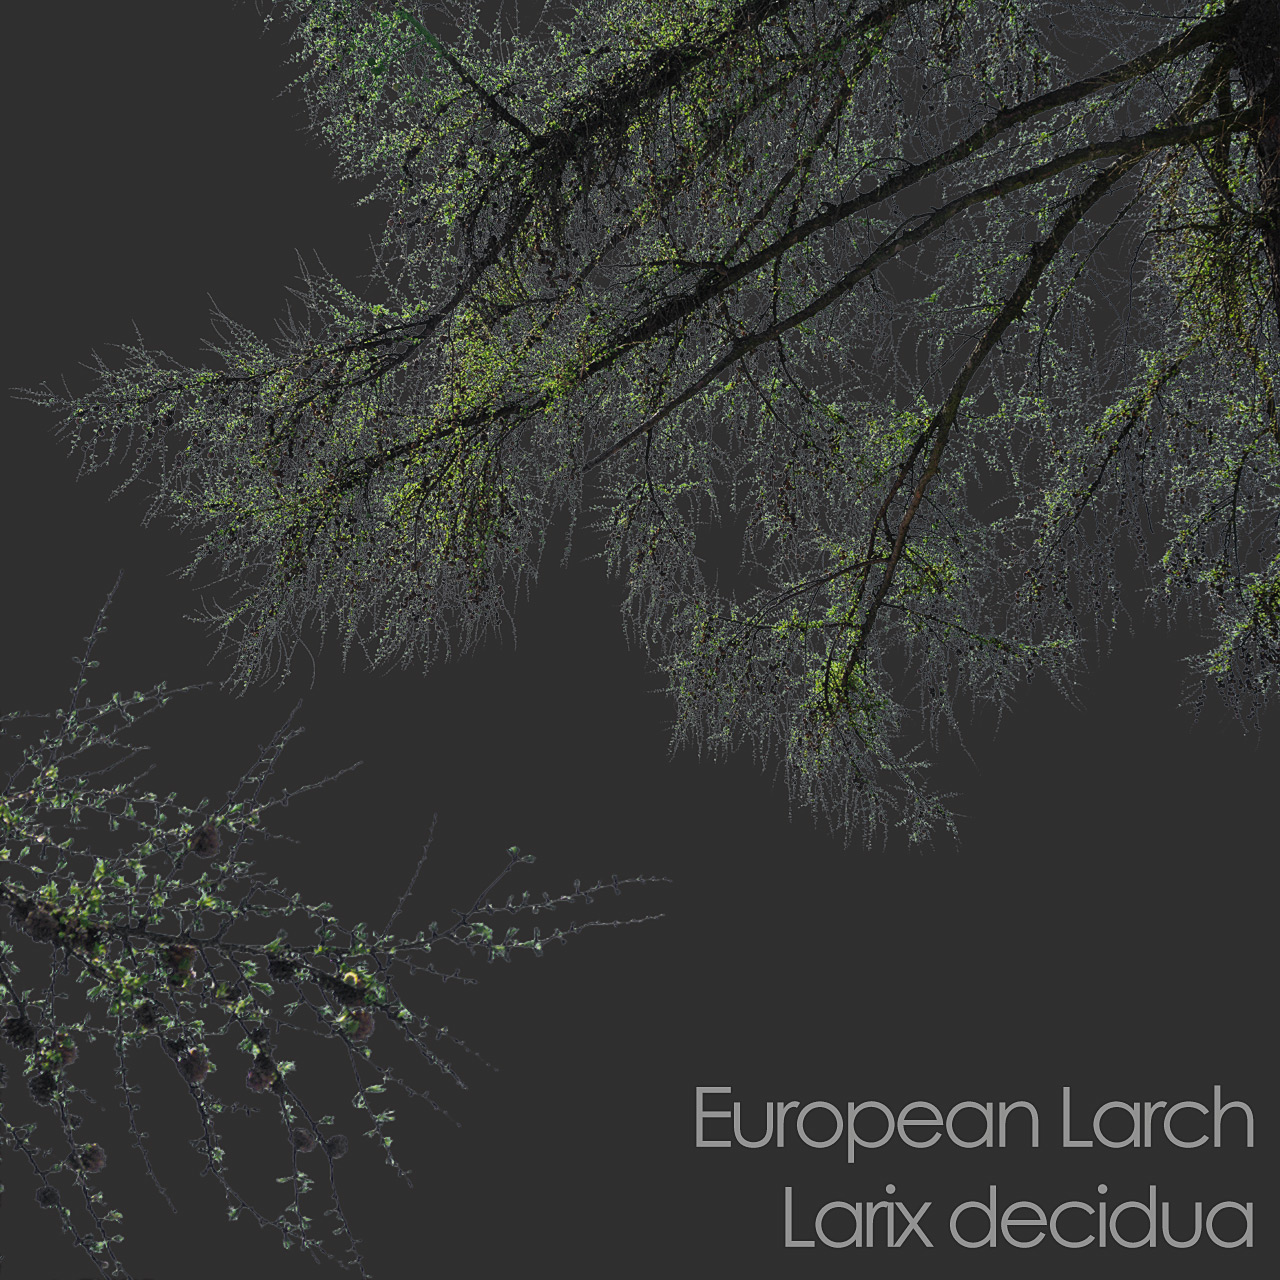 European Larch foreground tree branch cutout